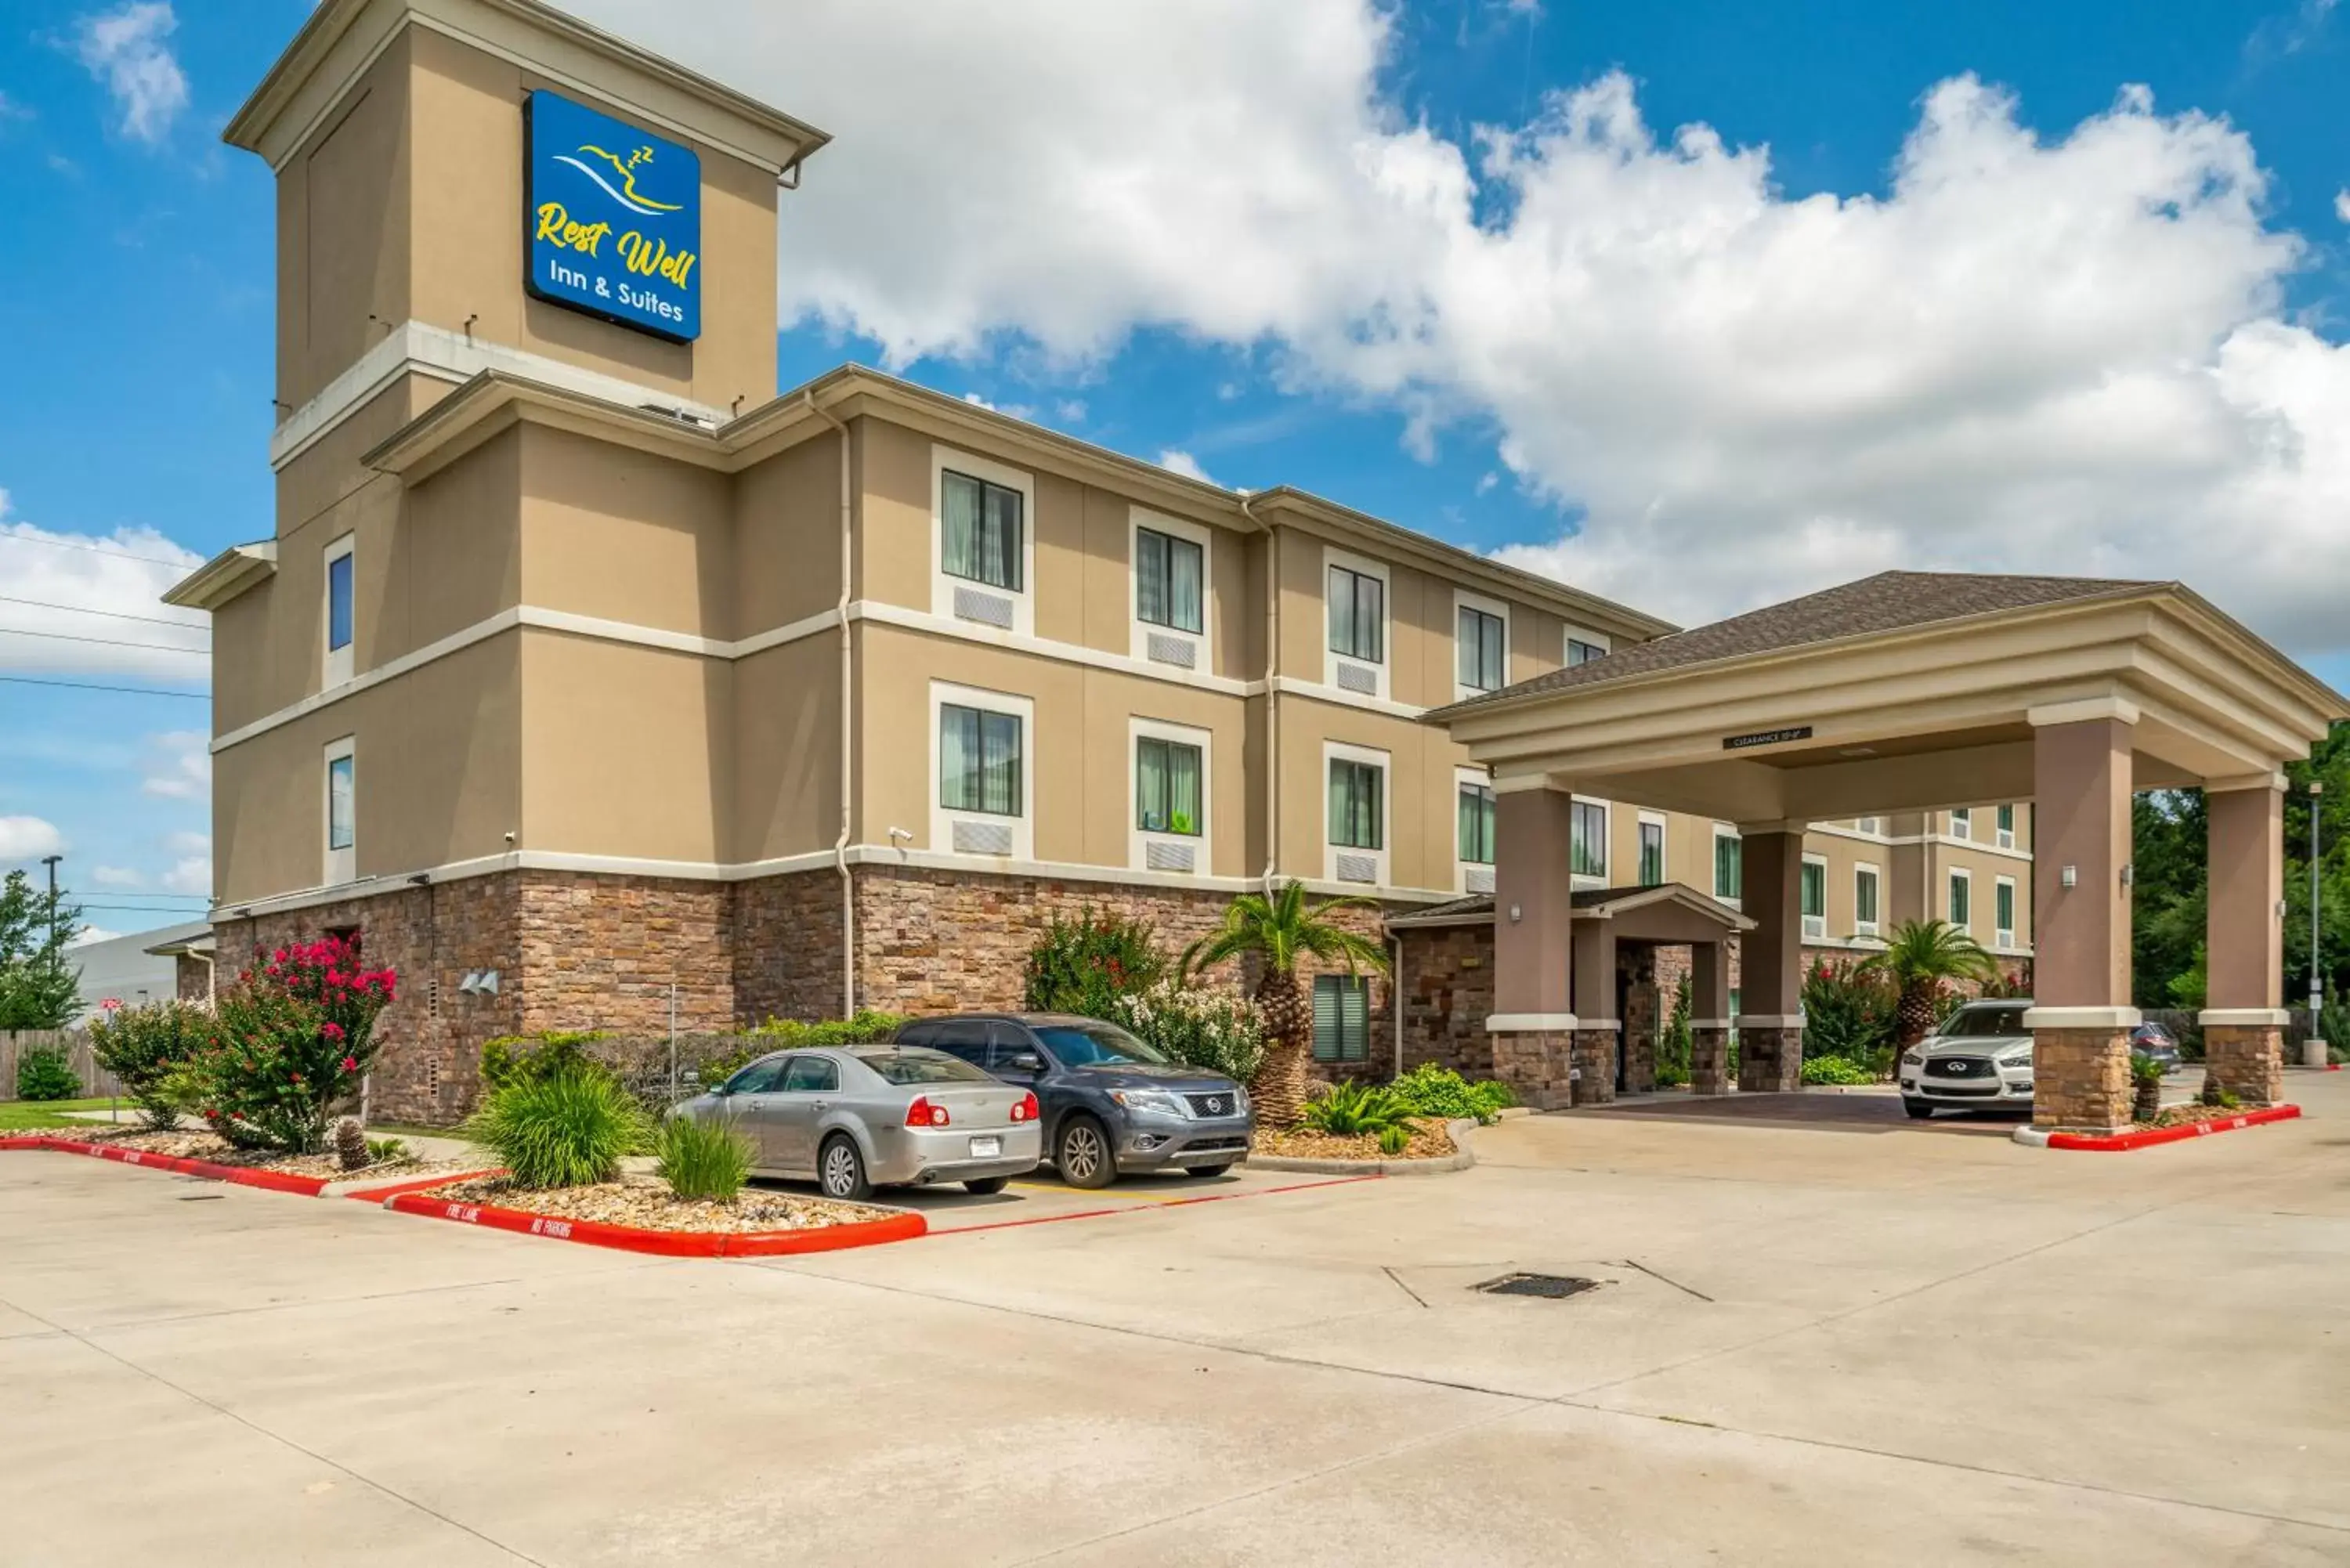 Property building in Restwell Inn & Suites I-45 North